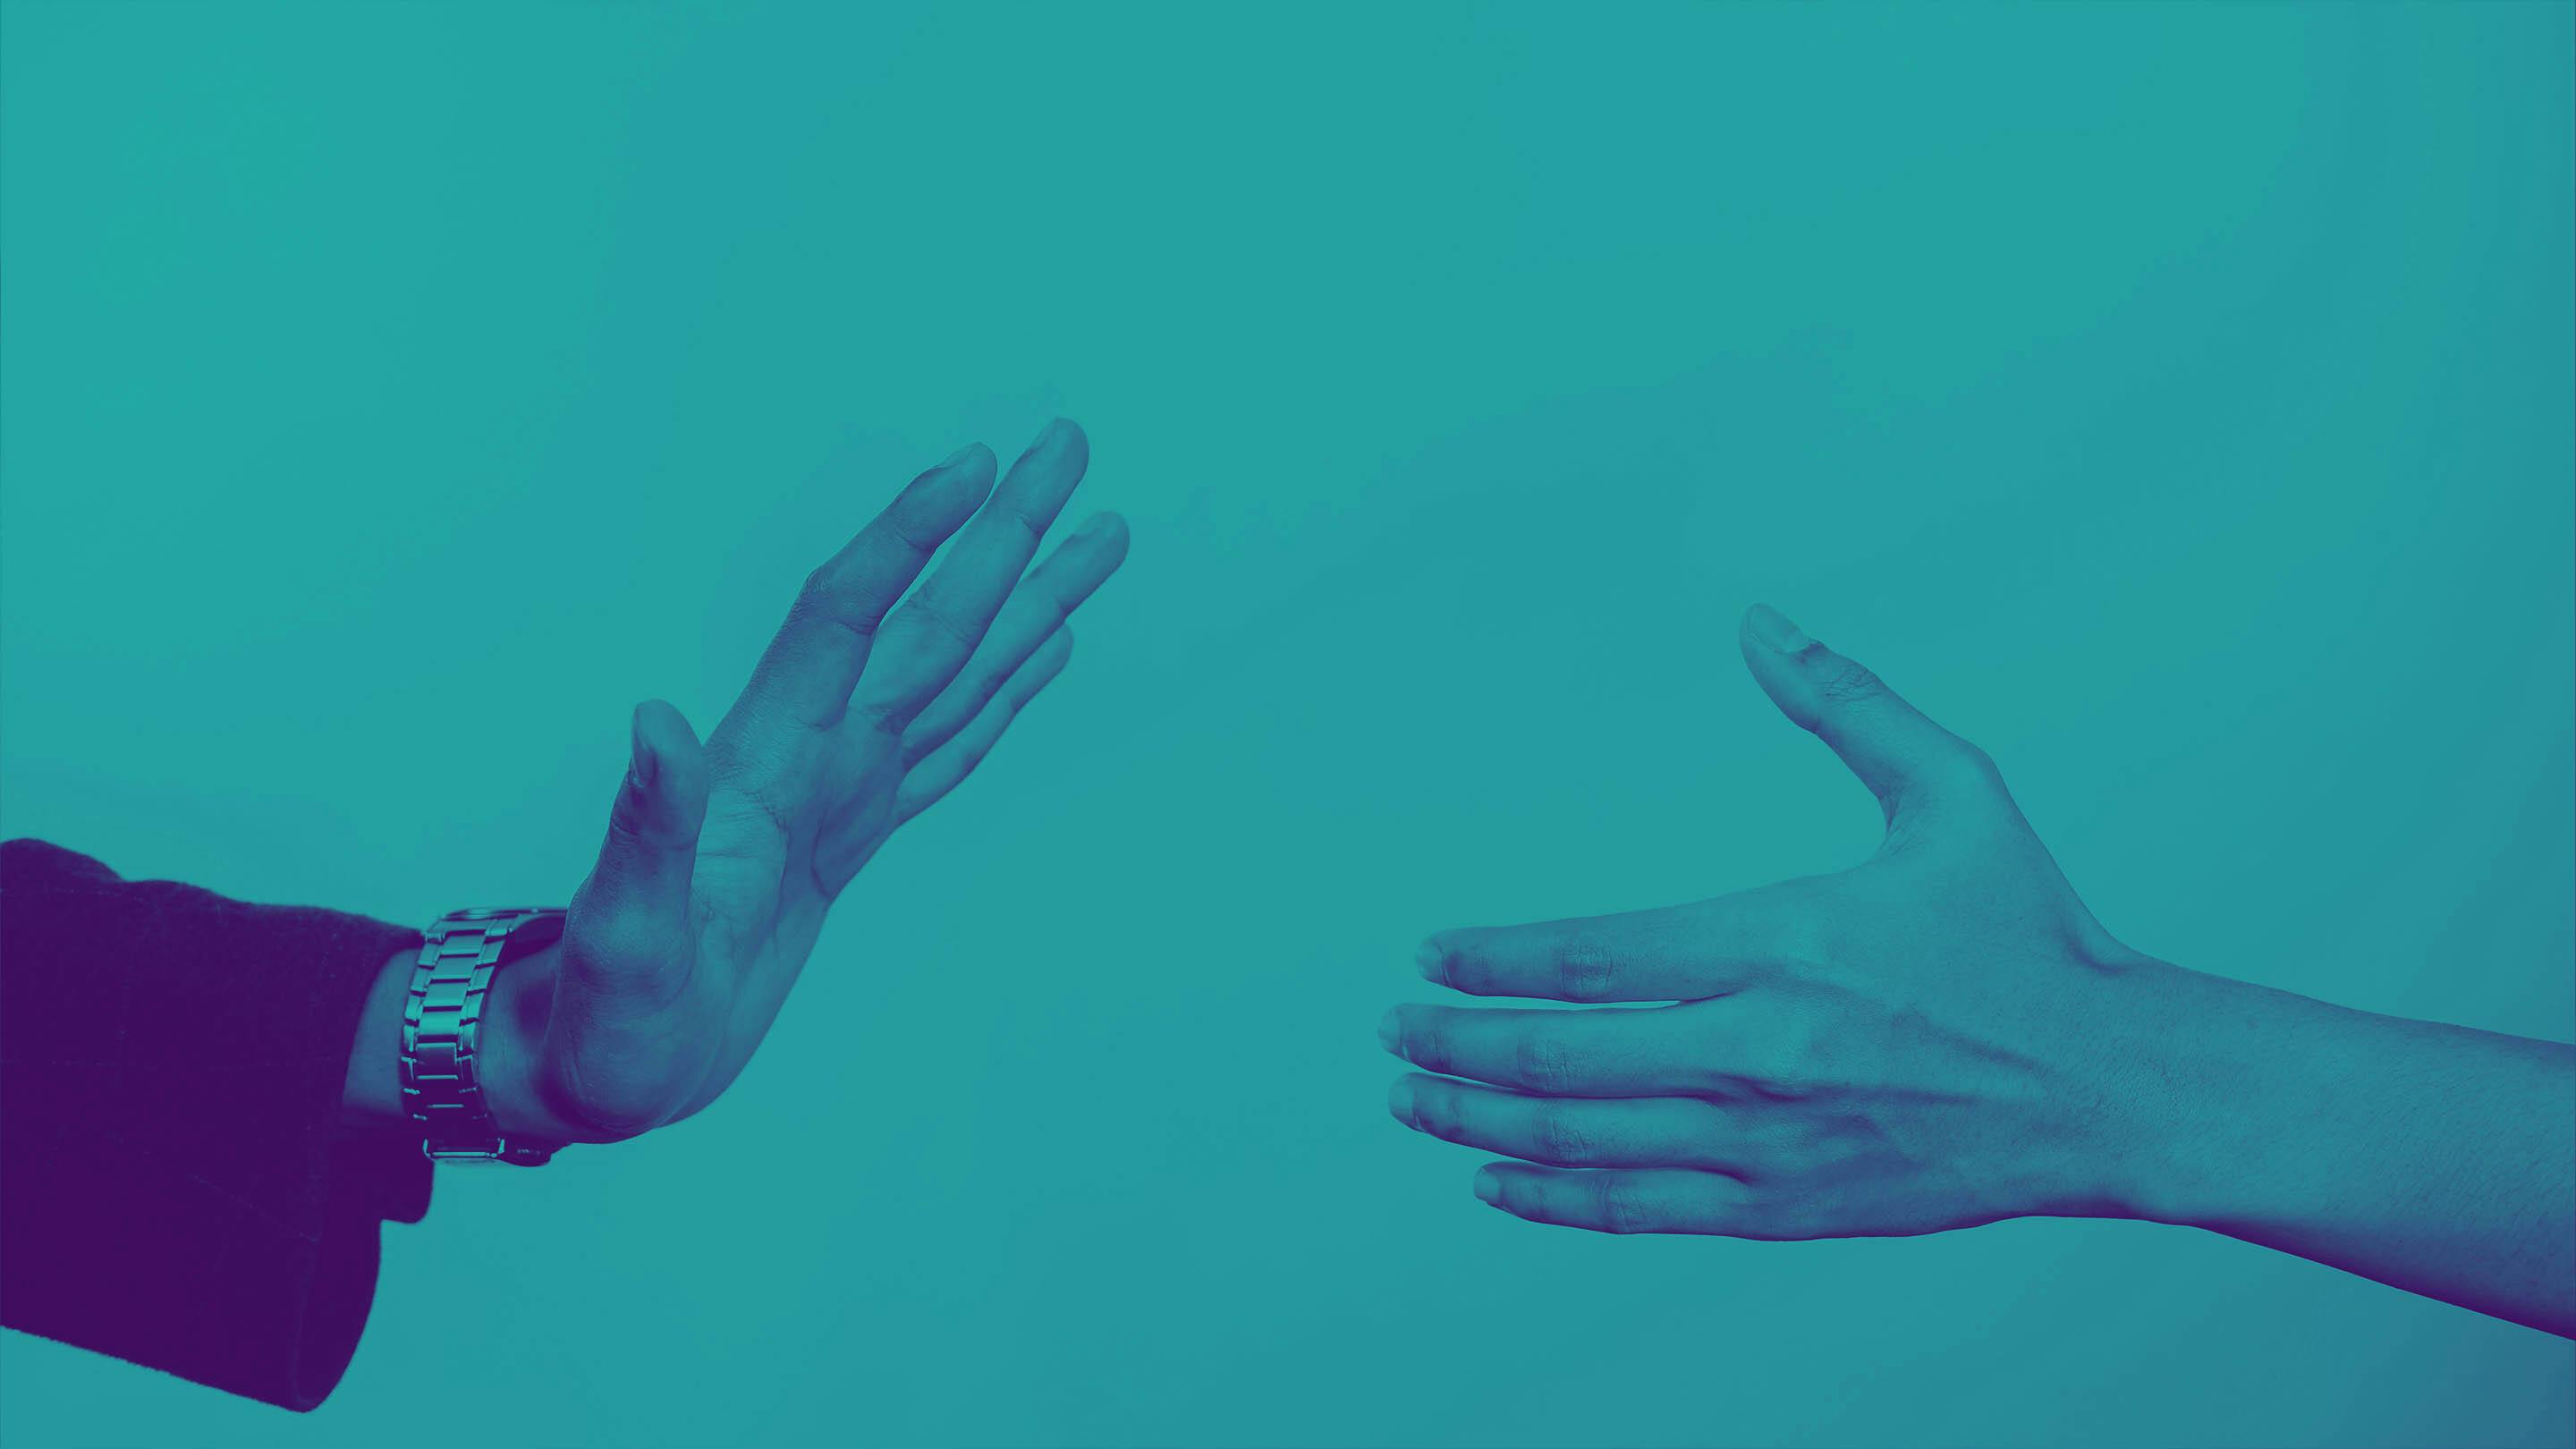 Stylized image of two hands, one reaching out for a handshake and the other refusing.